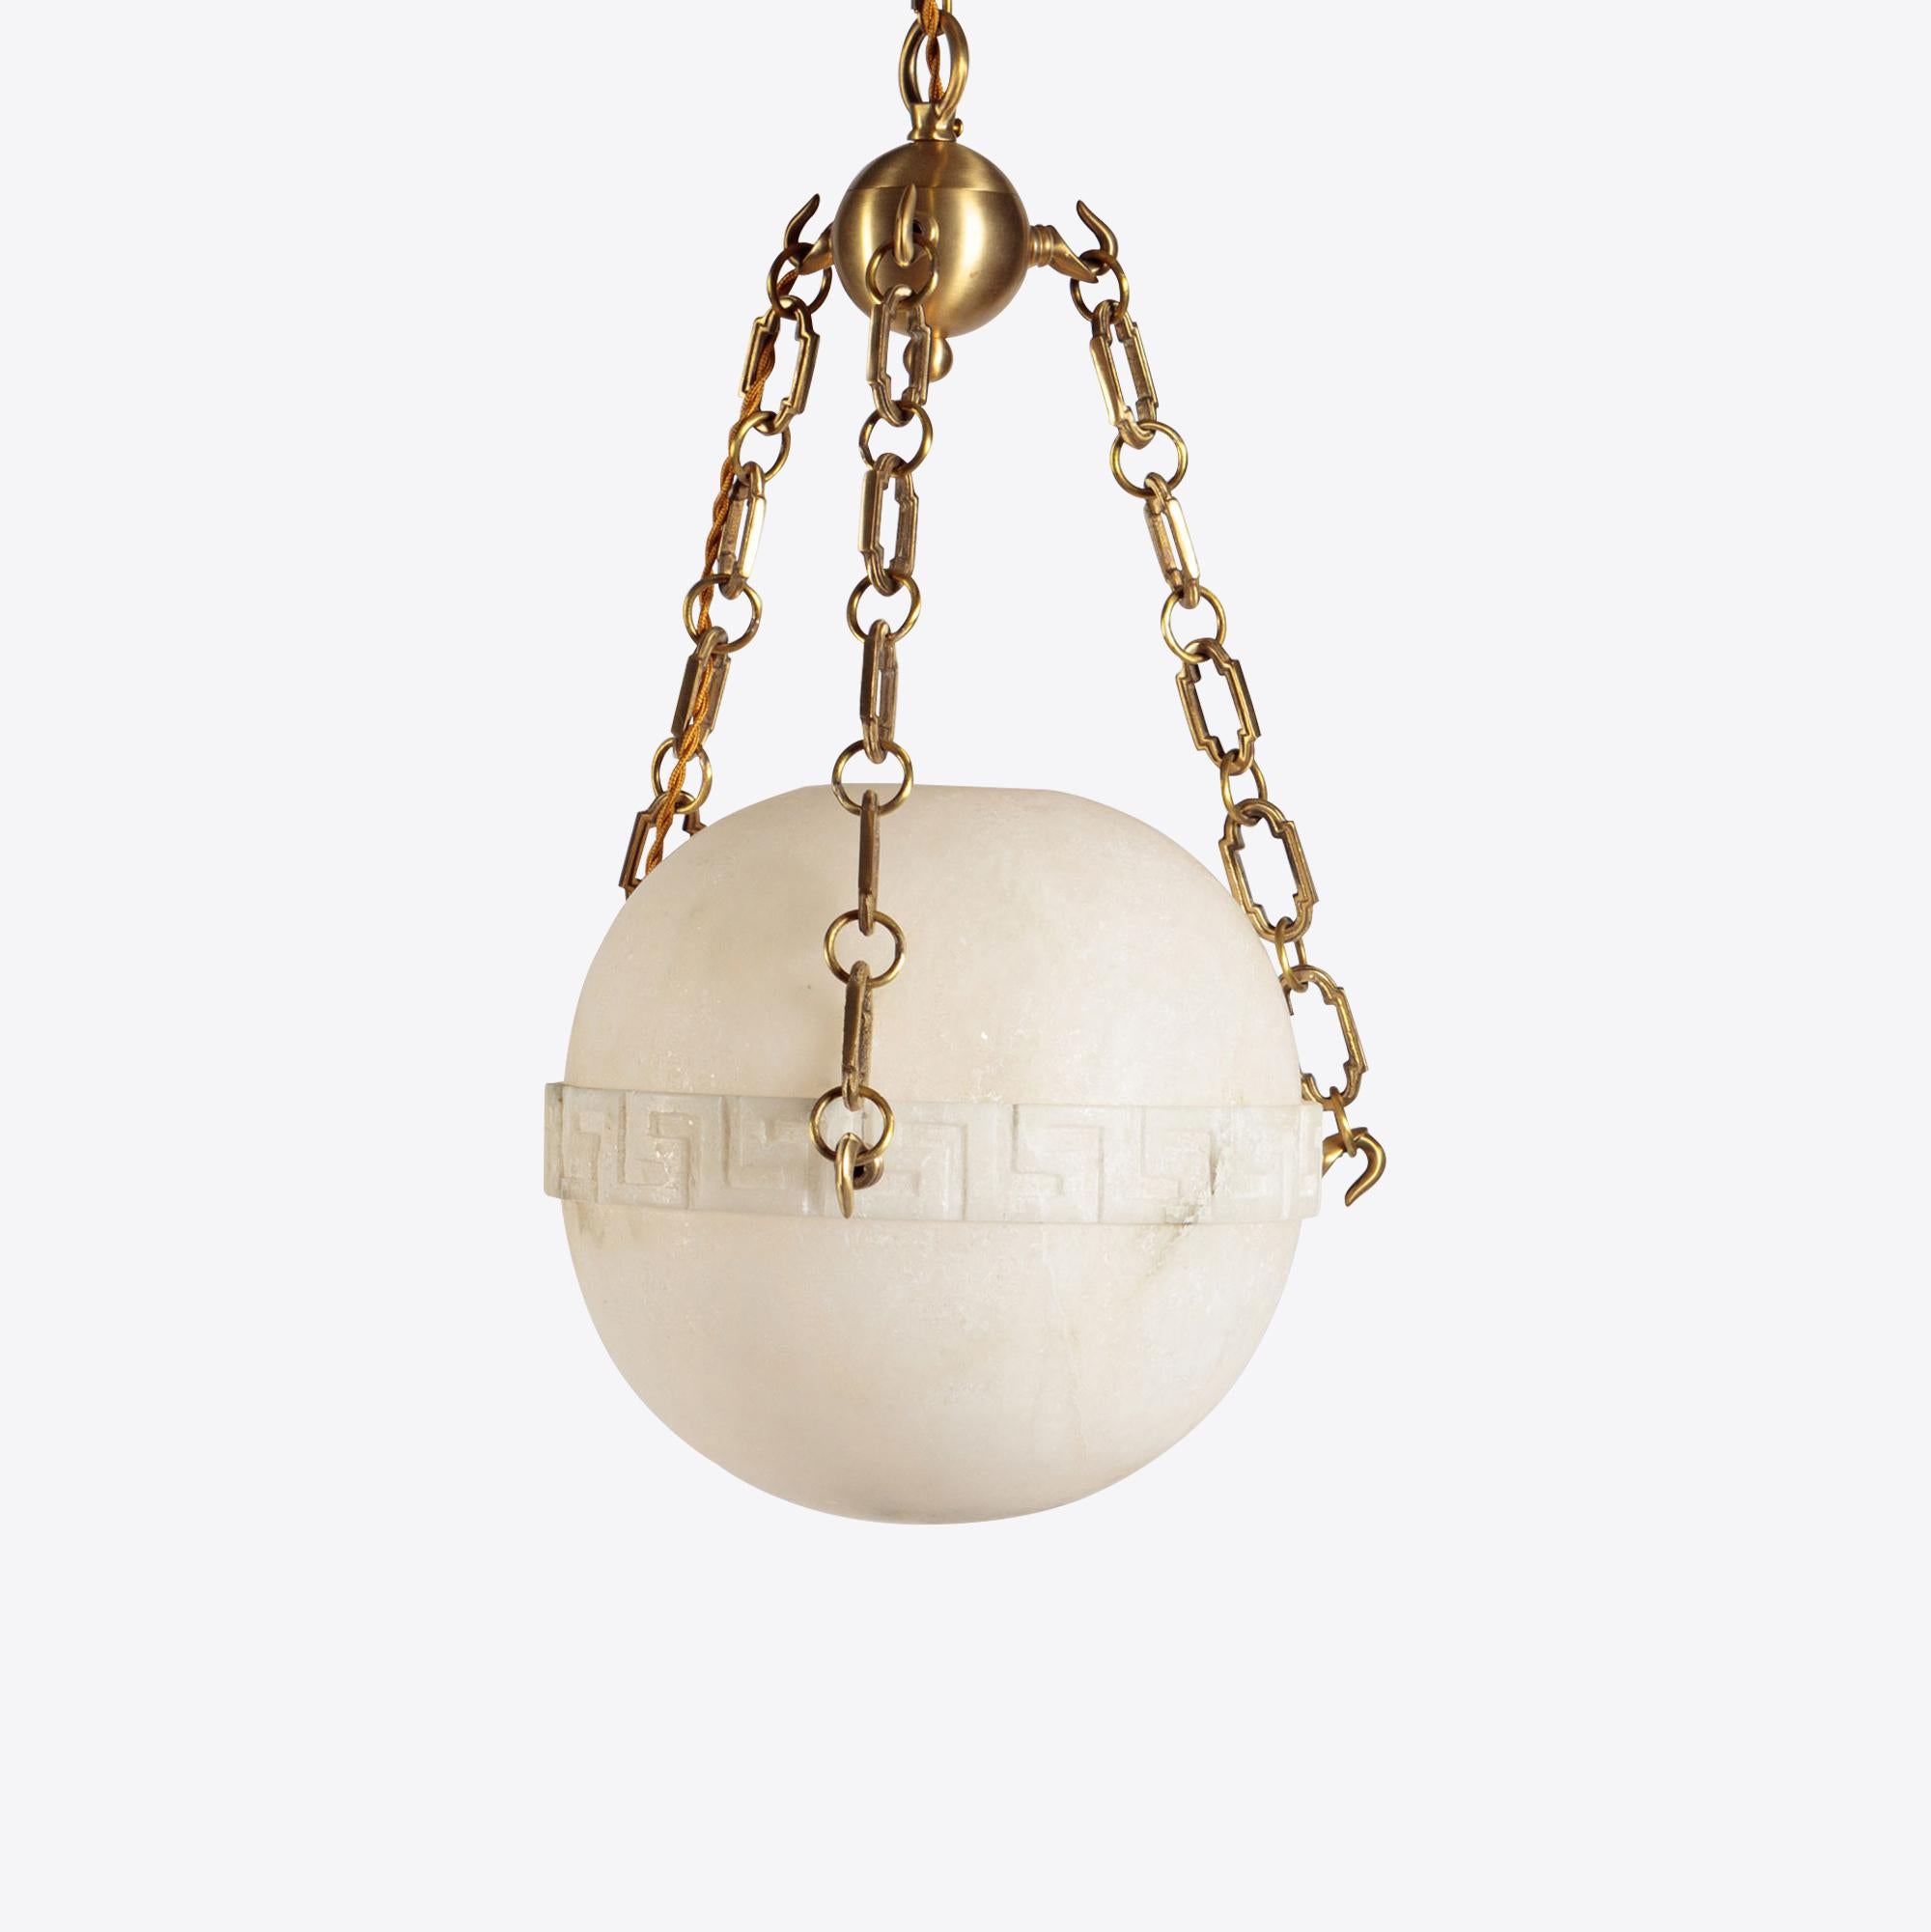 A beautiful carved alabaster globe is suspended from brass chains to create a hanging lantern. The alabaster features a classical Greek key motif while the brass chain and ball add to the traditional beauty of this lantern.